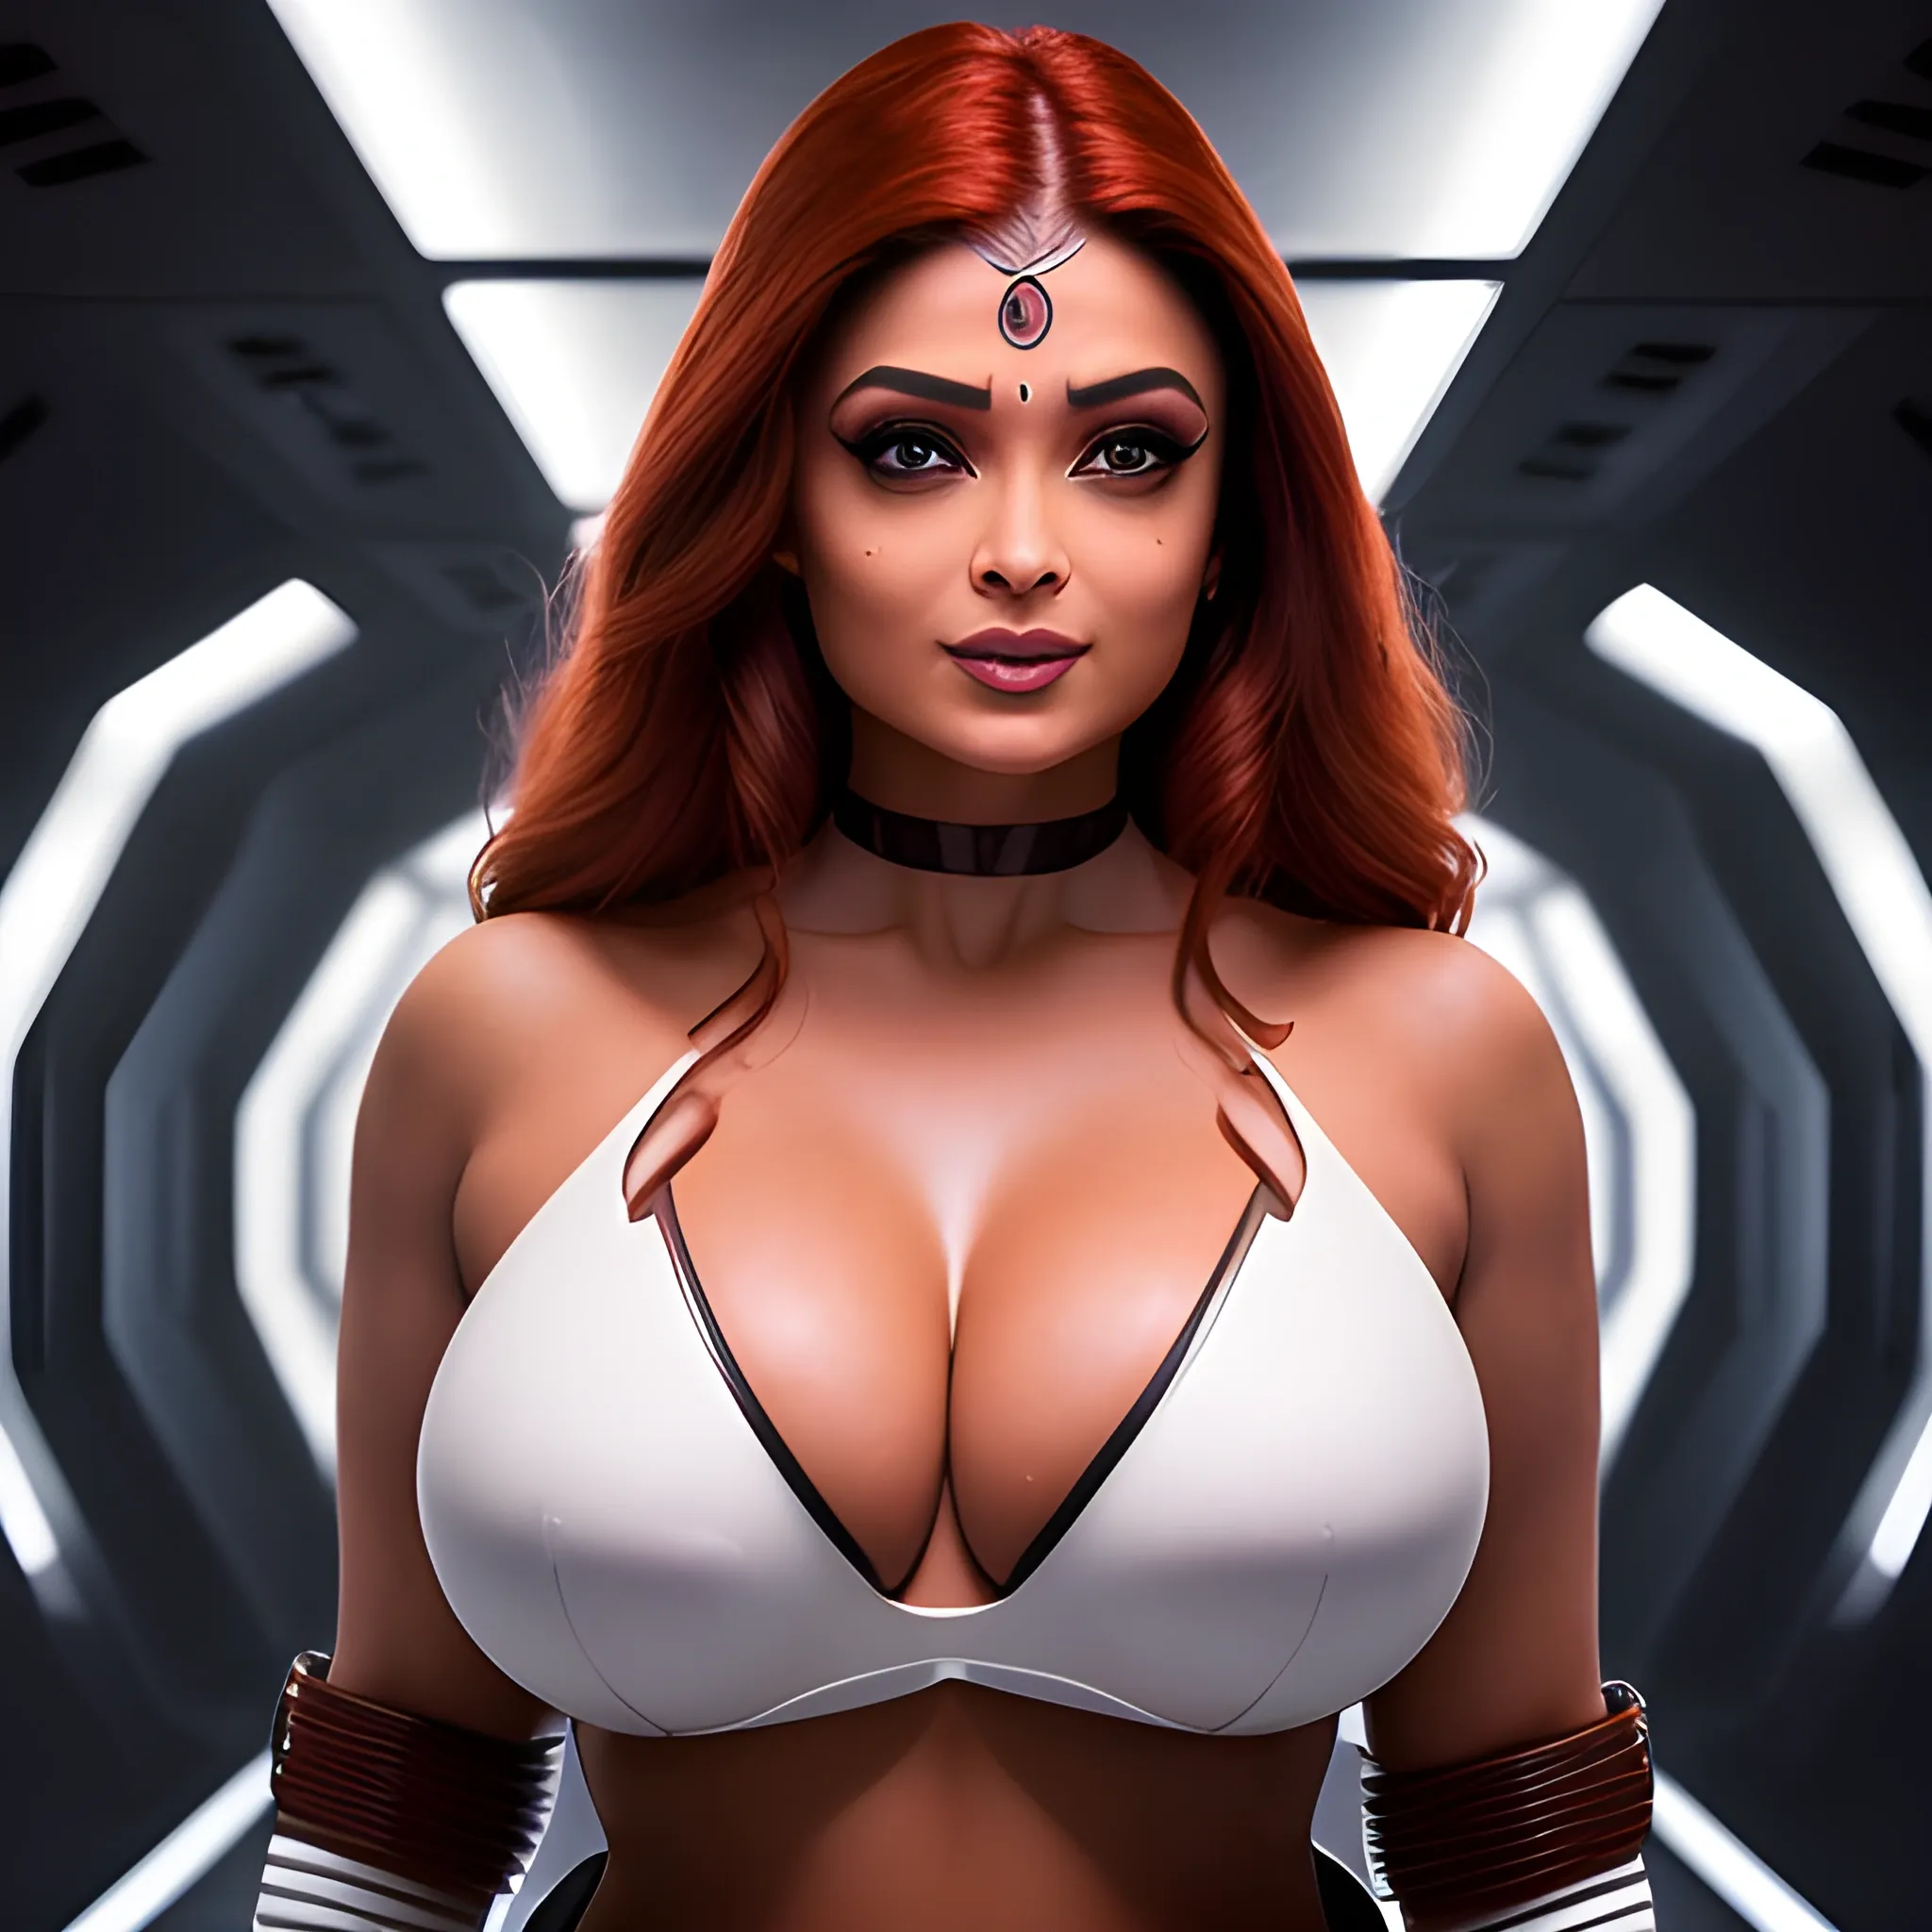  professional photograph of, 8k, D
Aishwarya Rai Sith lord, full body, natural enormous breasts, wearing half white bikini, wavy reddish hair, cute smile, in a dark spaceship corridor, realistic hands, five slender fingers on beautiful chest, two thumbs, muscular body, beautiful lips, curved eyebrows, curved eyelid, beautiful eyes, ultra realistic,